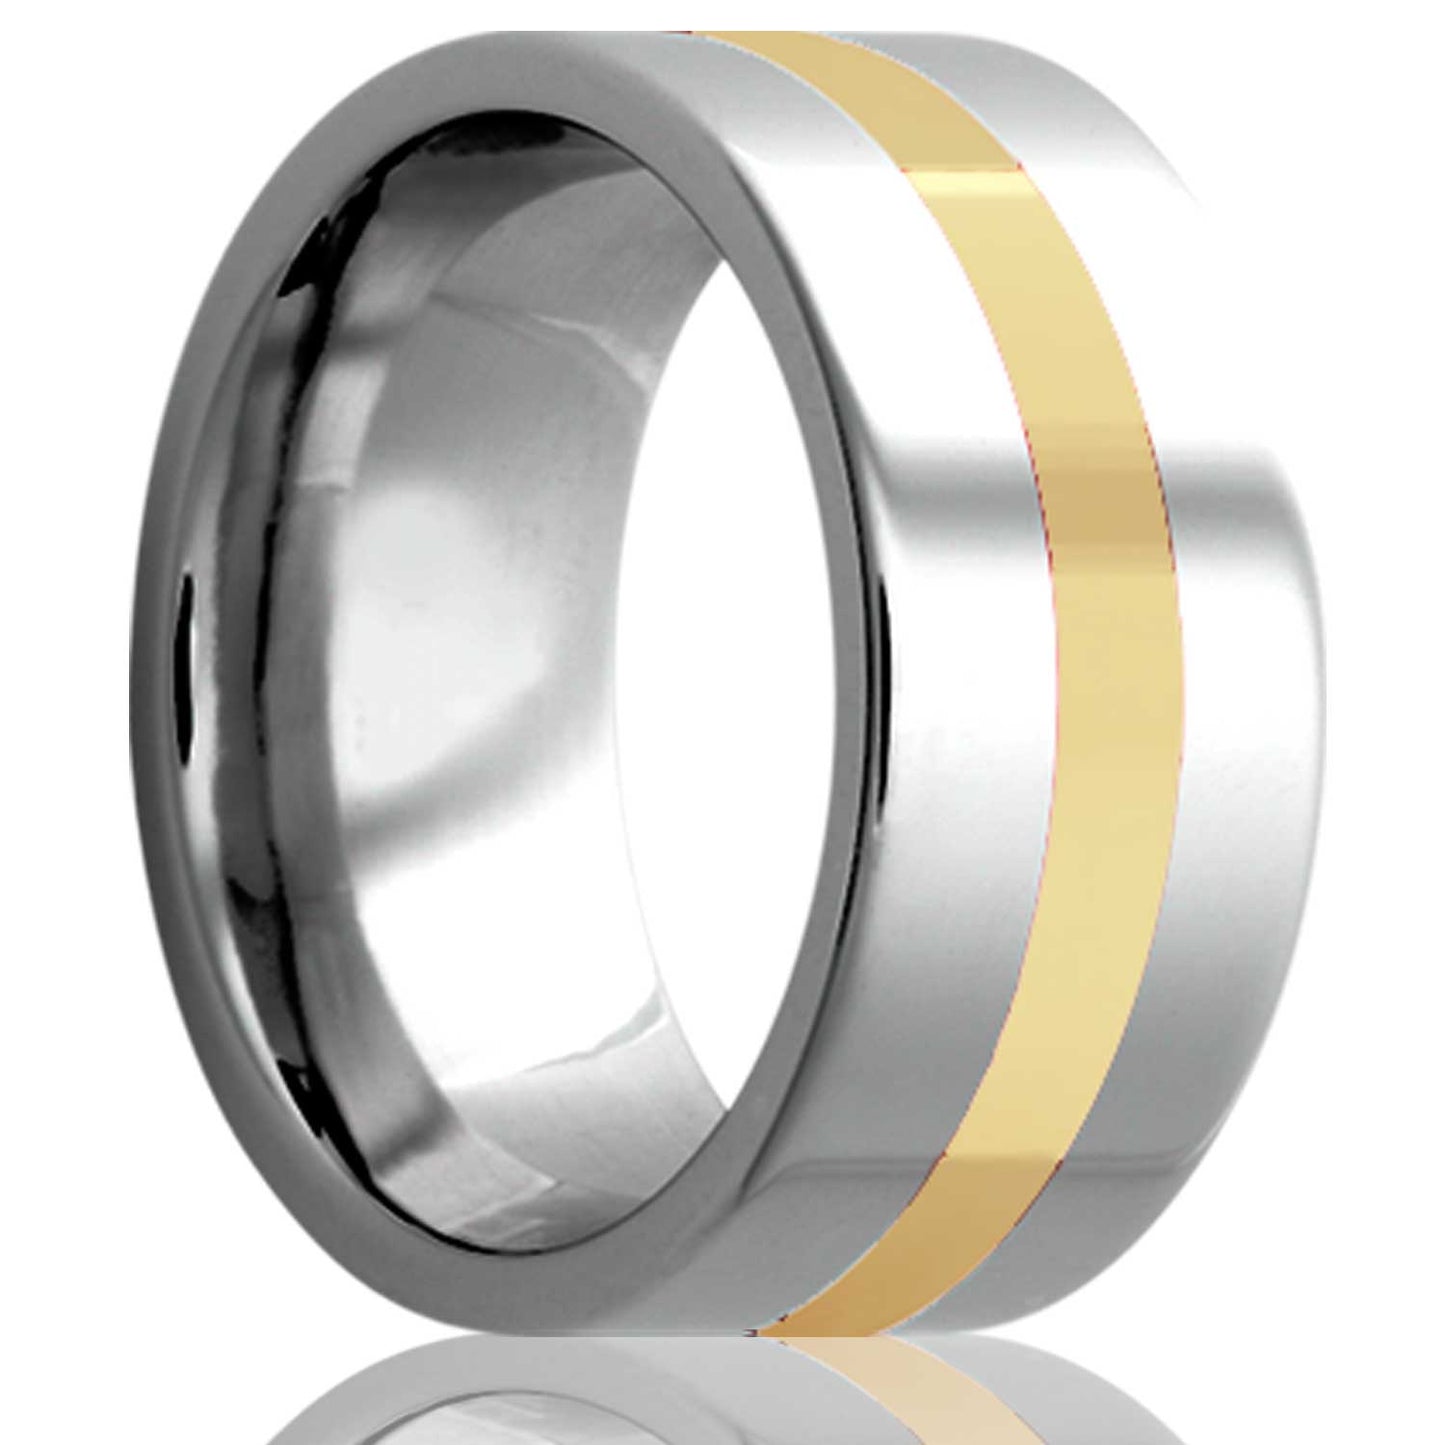 A 14k yellow gold inlay tungsten wedding band displayed on a neutral white background.